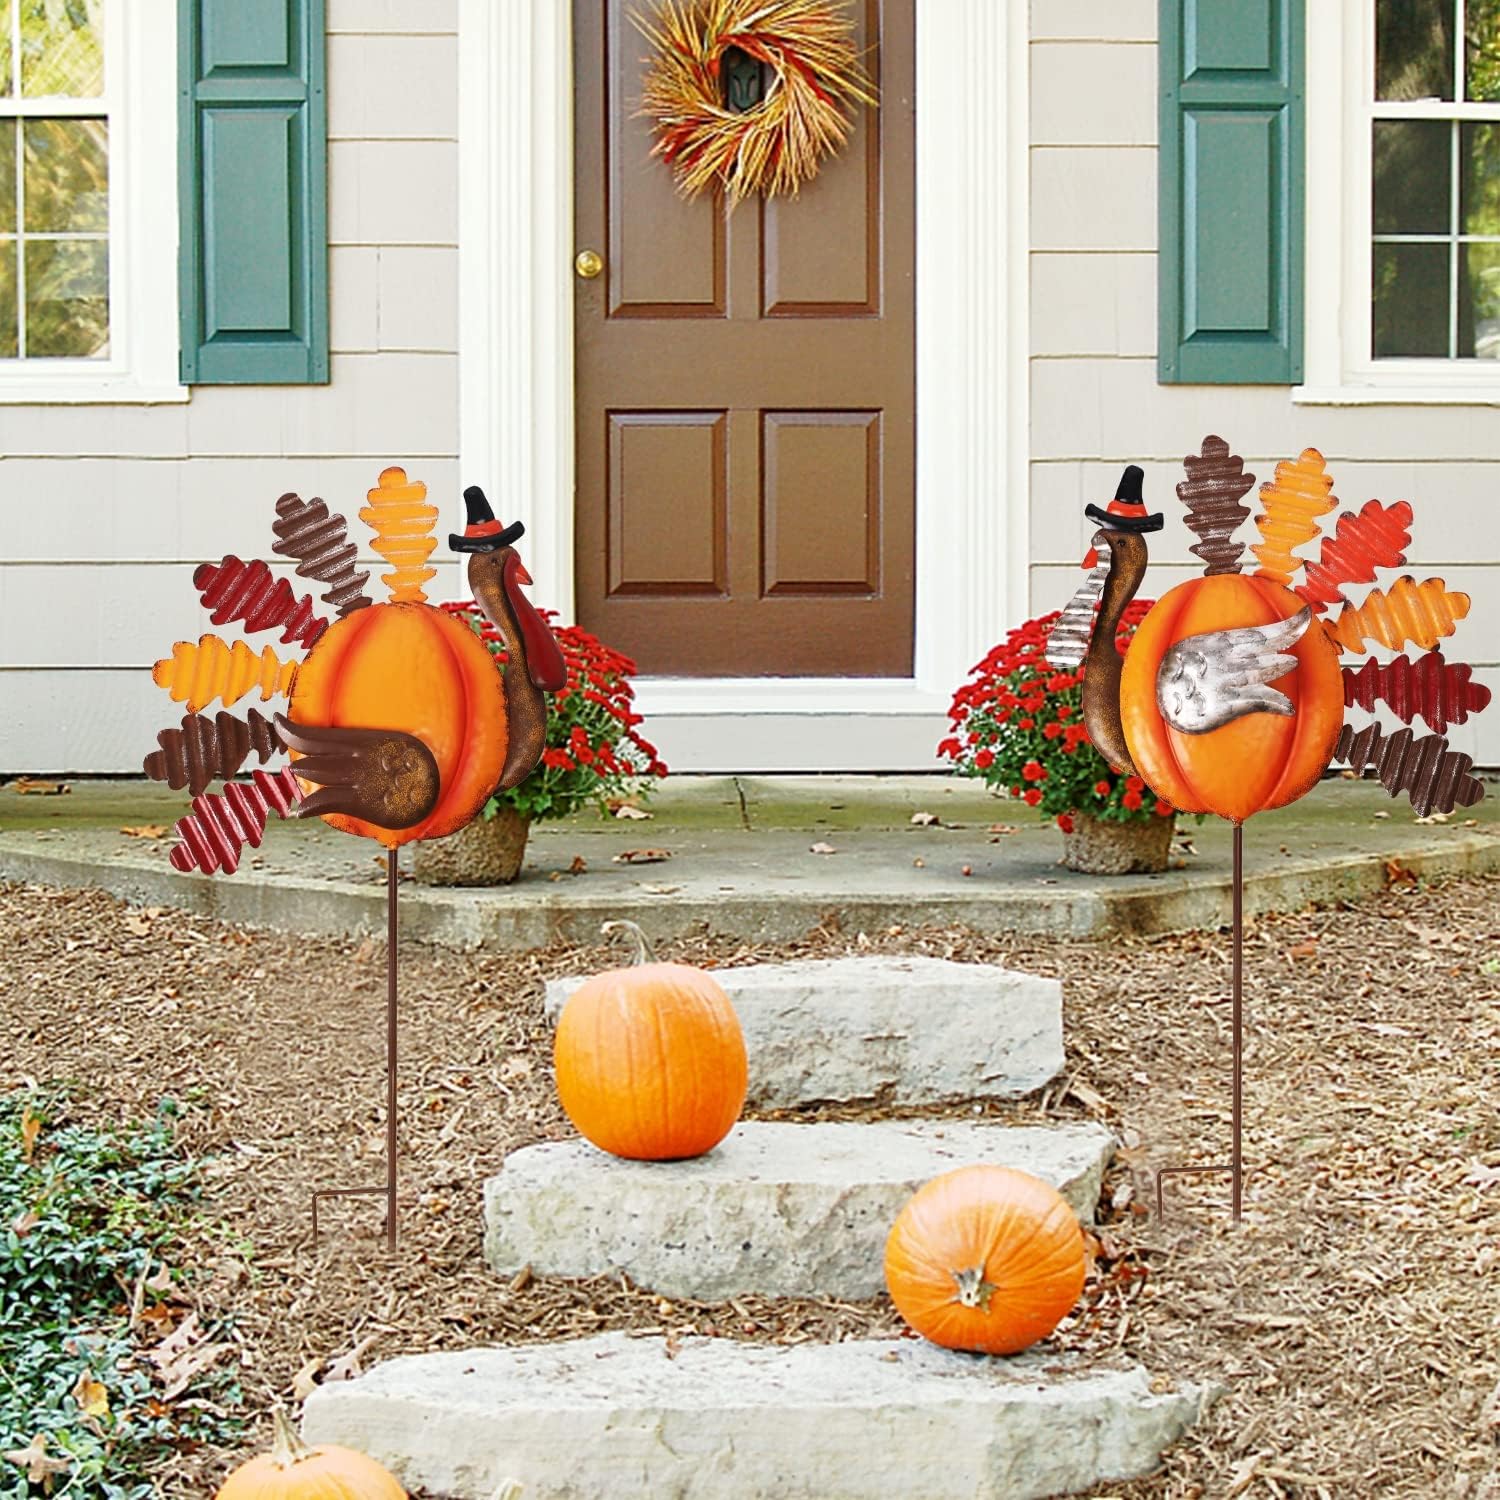 Lulu Home Thanksgiving Turkey Decors, Set of 2 Metal Turkey Stakes Fall Decor, Happy Thanksgiving Autumn Fall Outdoor Decorations